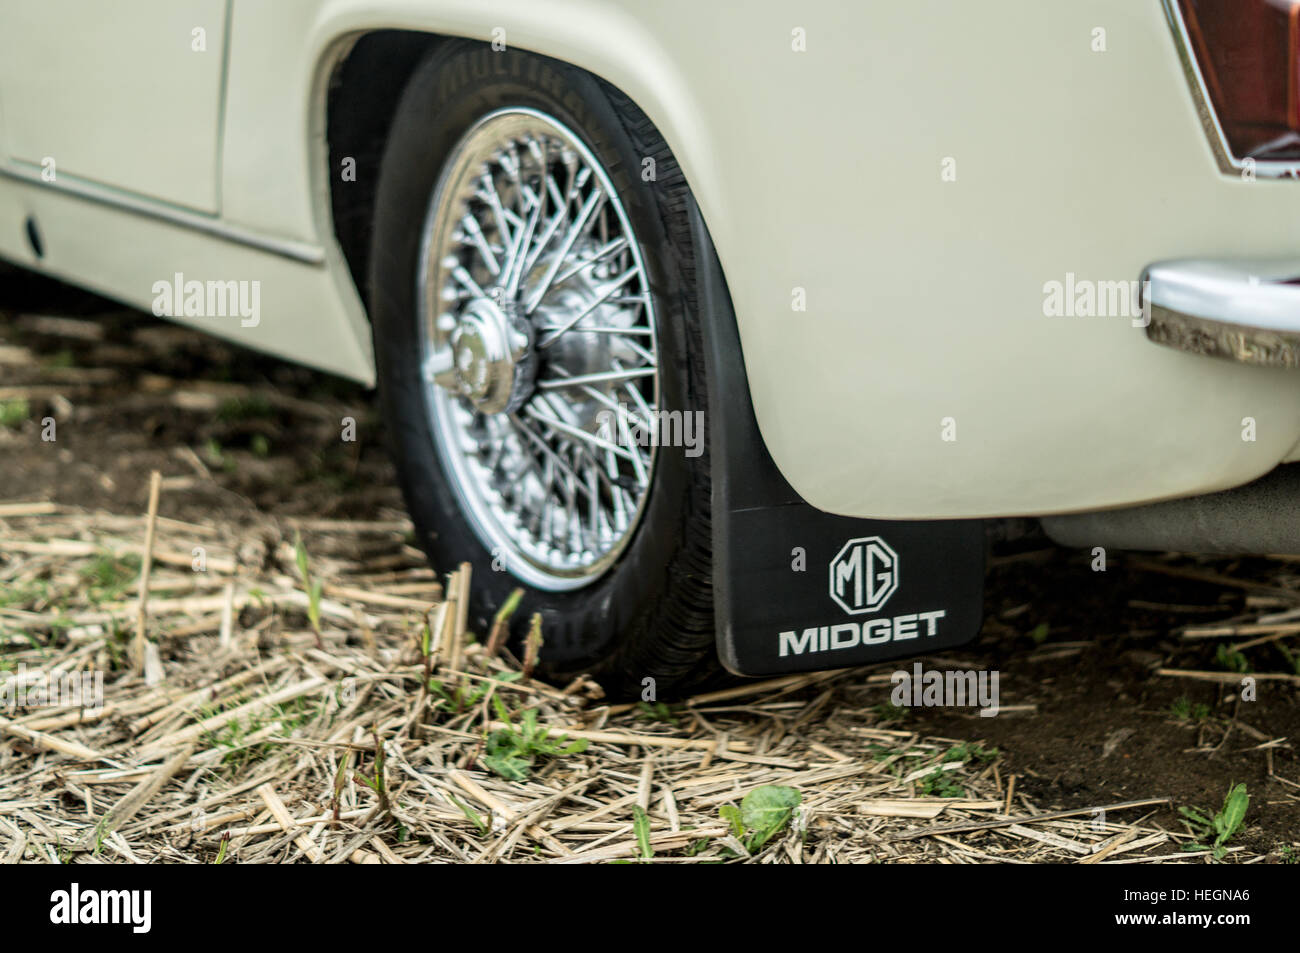 MG Midget rear wheel and mud flap with name on. Stock Photo